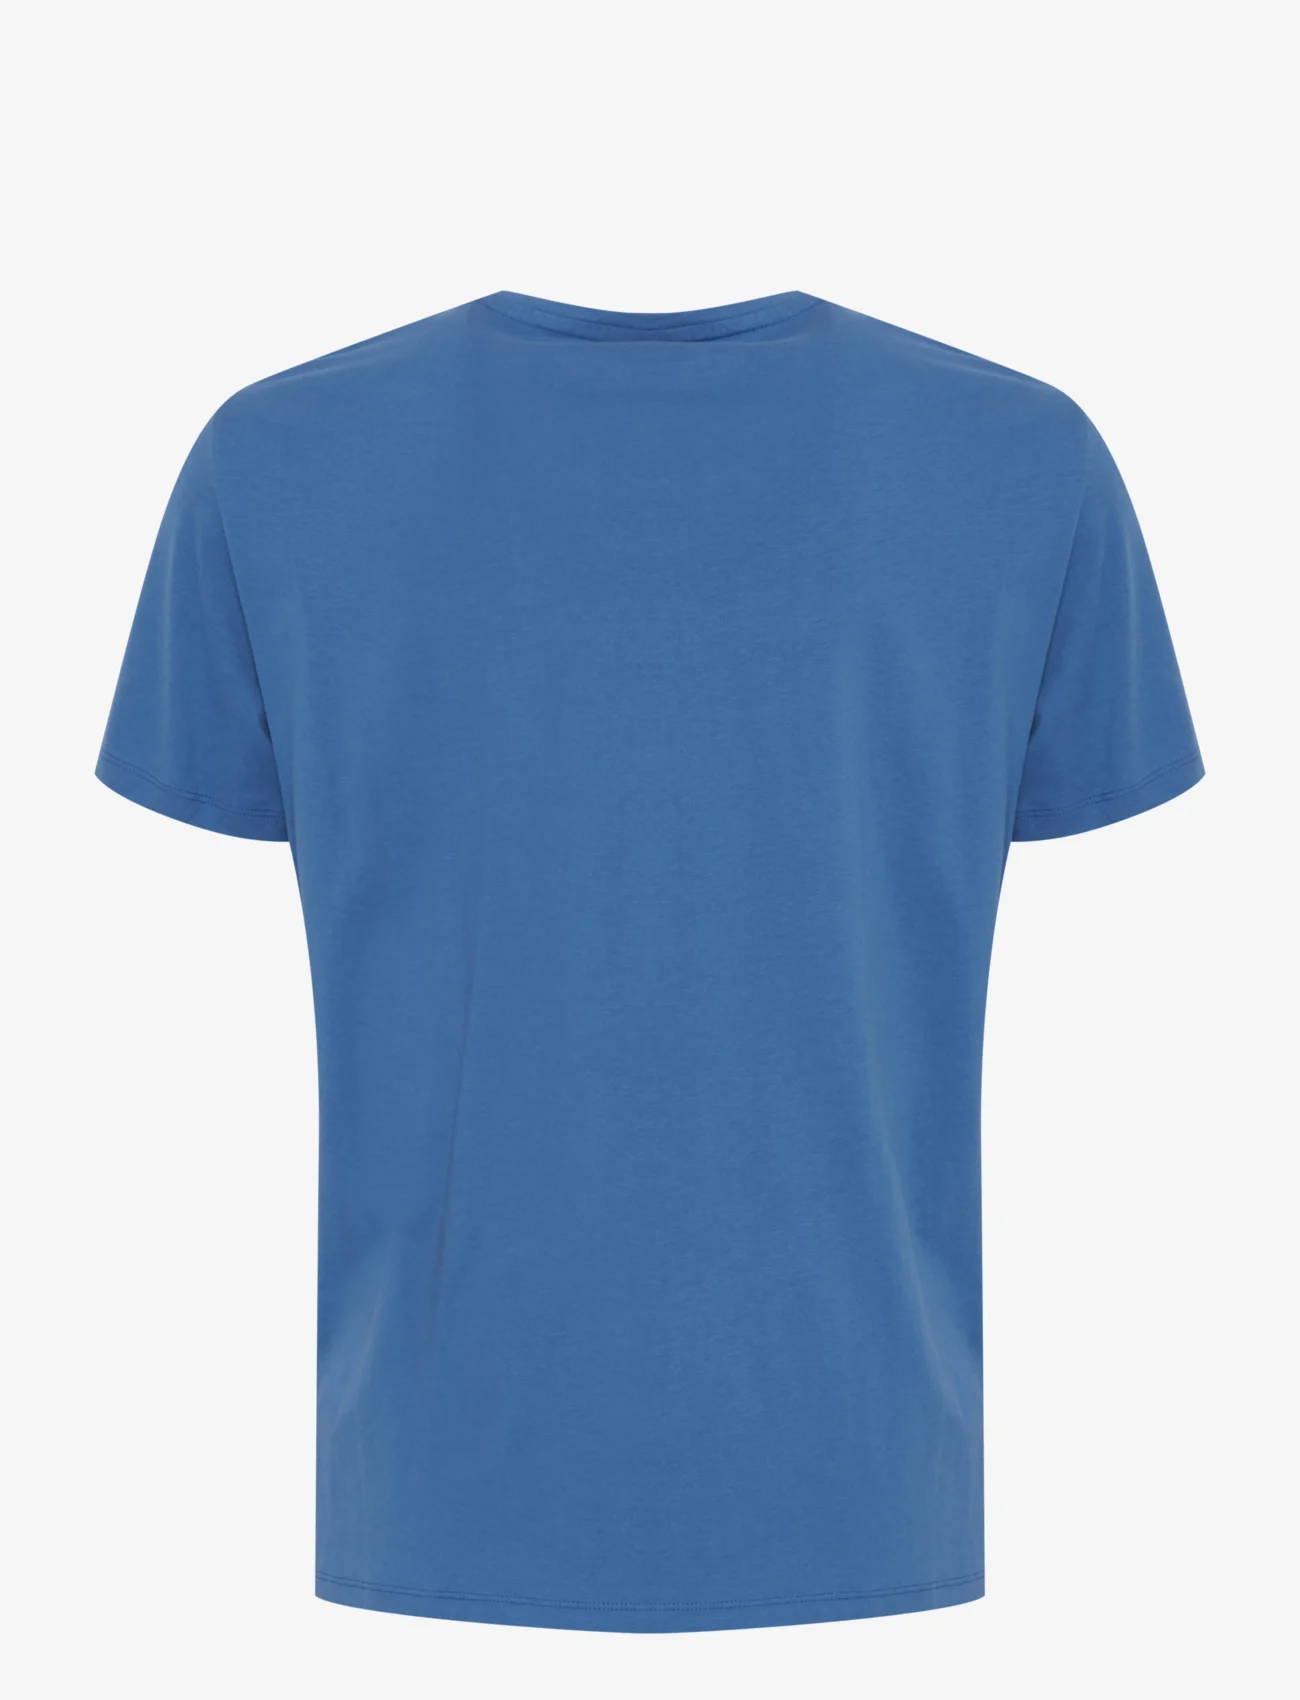 Blend - Tee - lowest prices - delft - 1